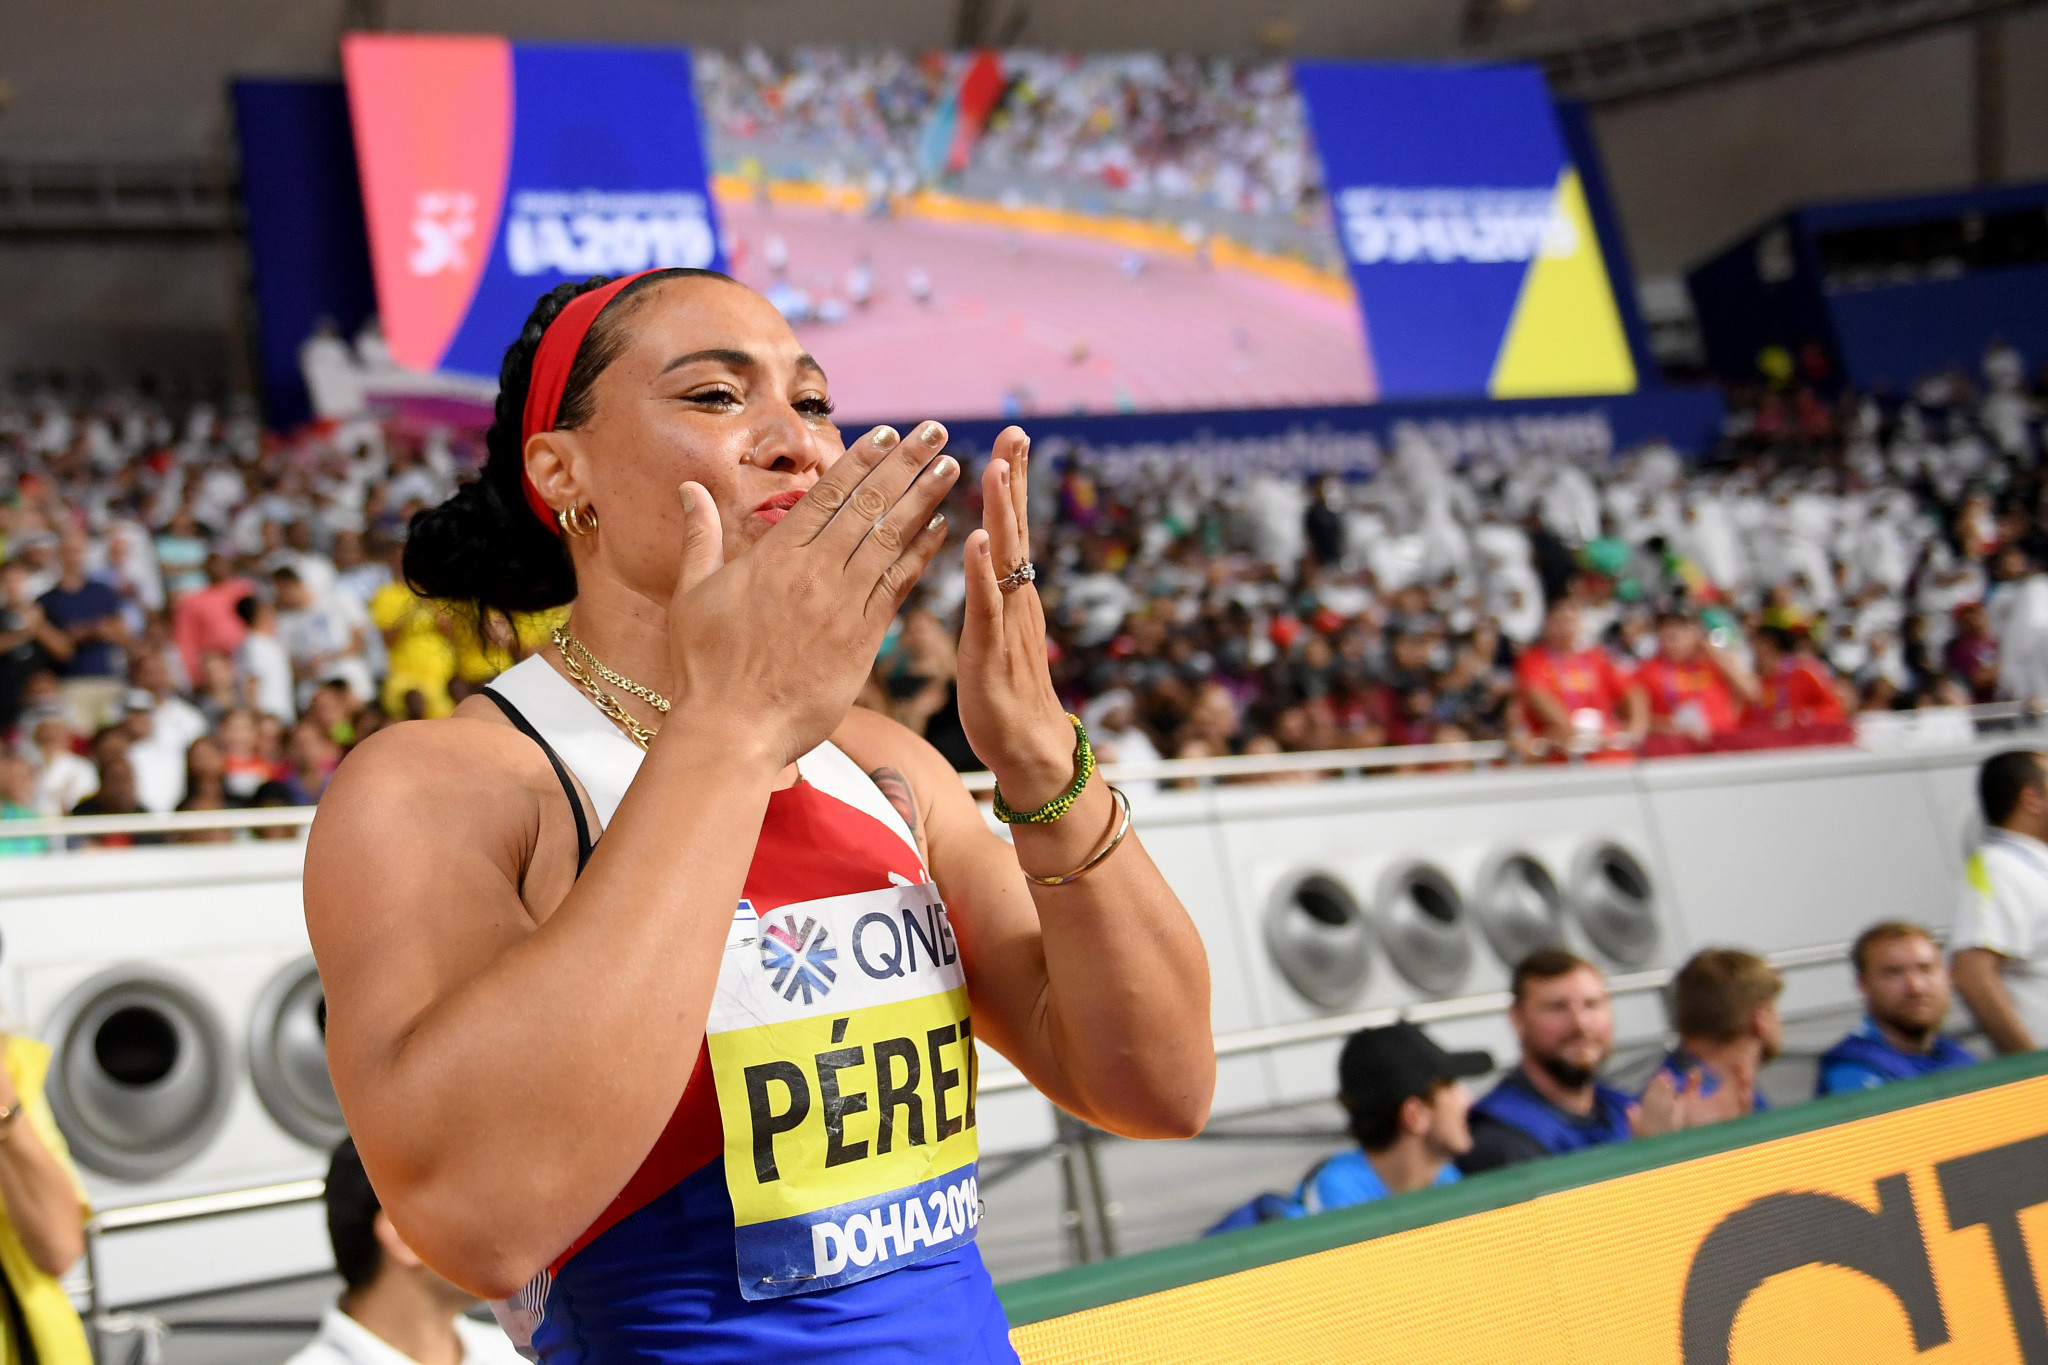 Cuba's Yaime Perez beat her compatriot Denia Caballero to win the women's discus ©Getty Images